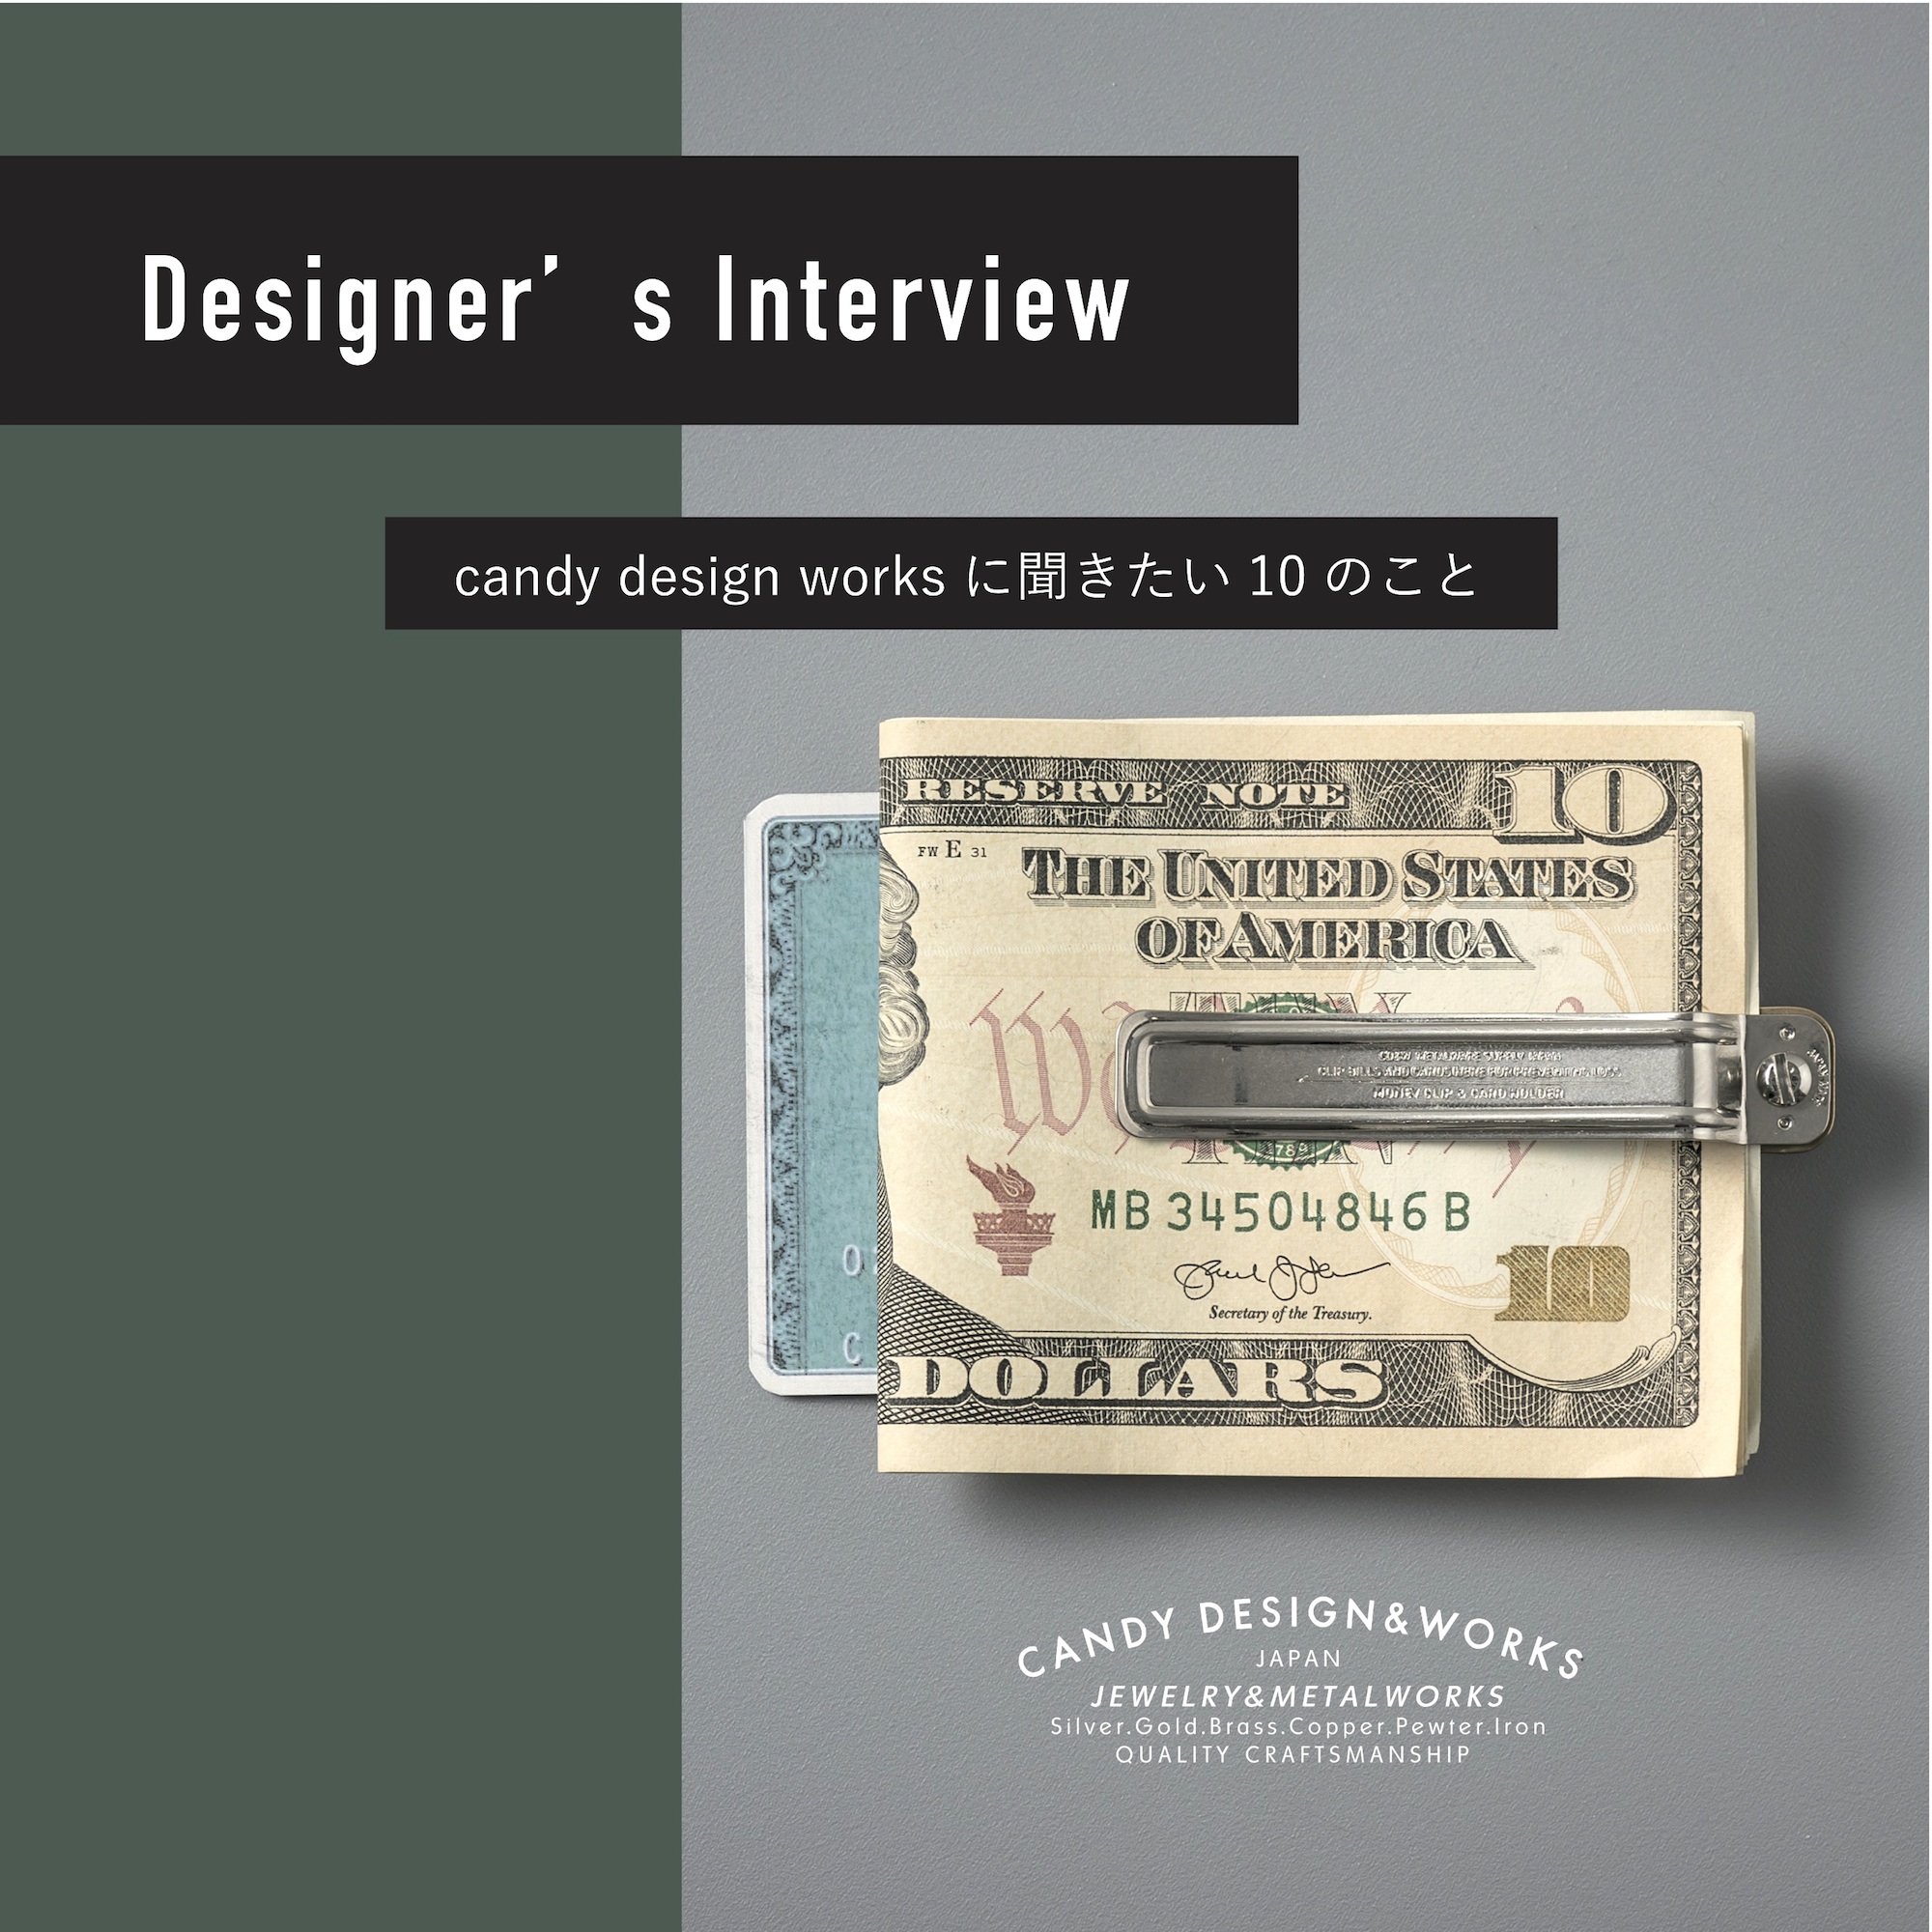 Interview To Designer Of CANDY DESIGN&WORKS